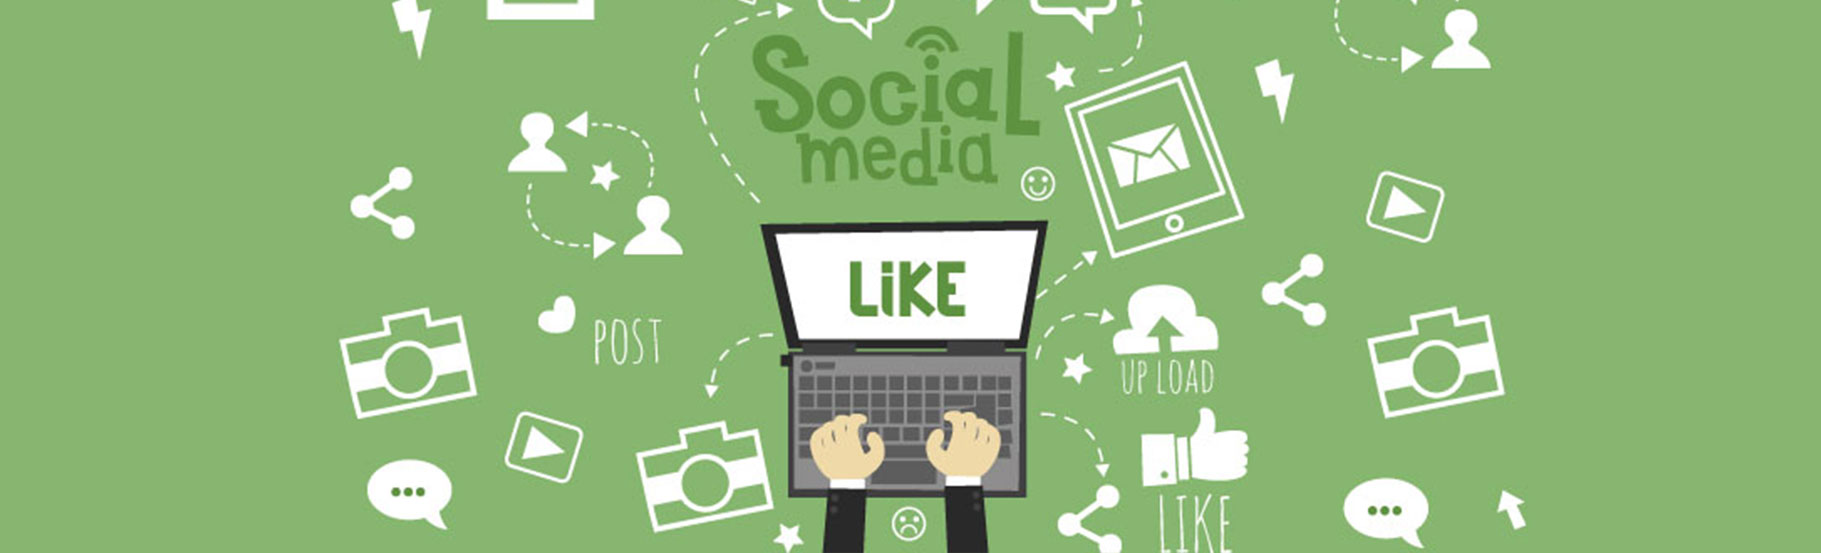 How to make a profit on social media?